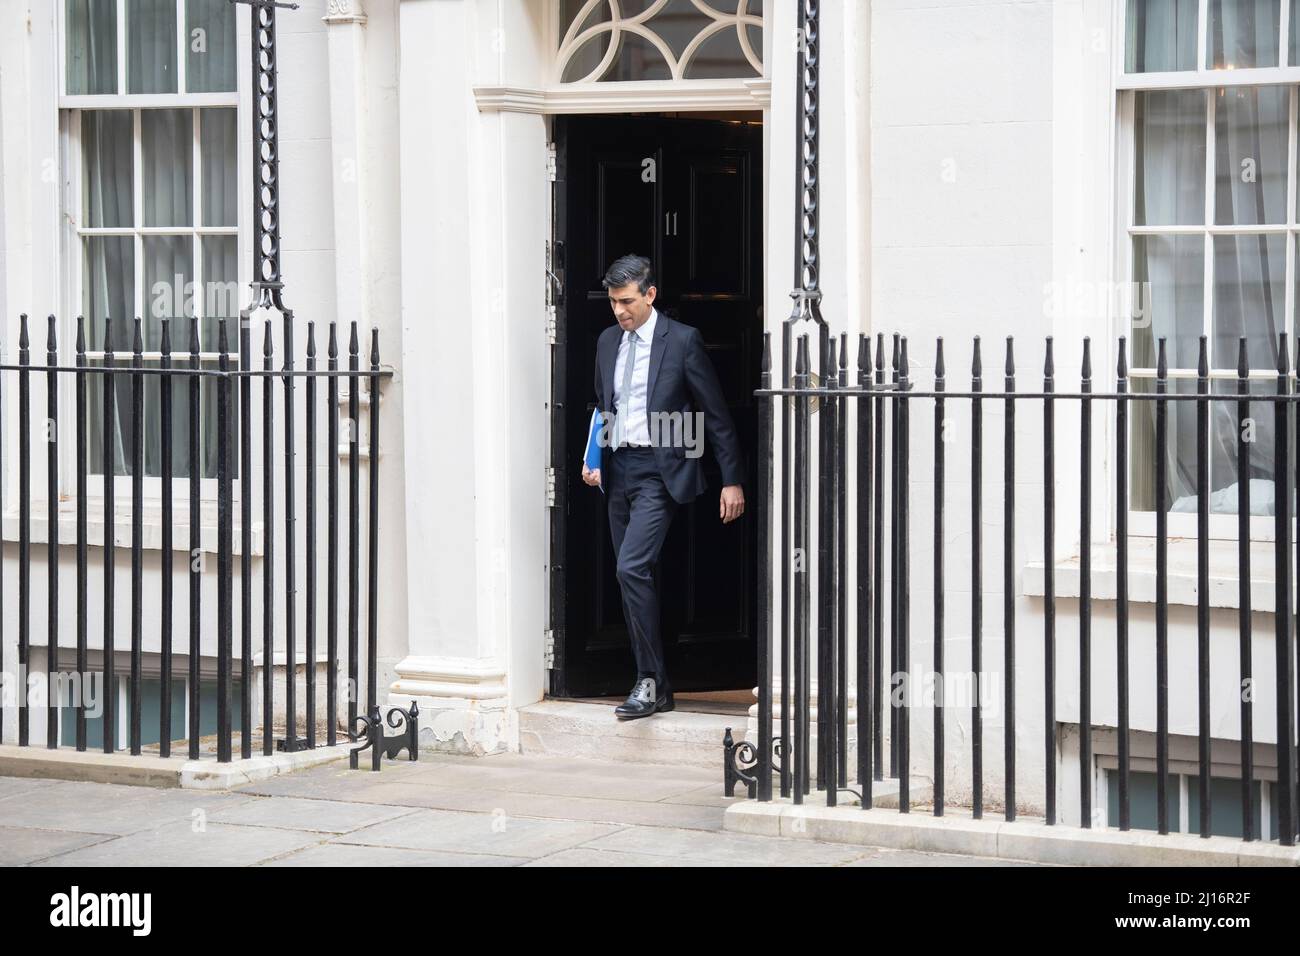 London, UK. 23rd Mar, 2022. Rishi Sunak MP, Chancellor of the Exchequer, outside 11 Downing Street before giving his Spring Statement to Parliament. Credit: Malcolm Park/Alamy Live News. Credit: Malcolm Park/Alamy Live News Stock Photo